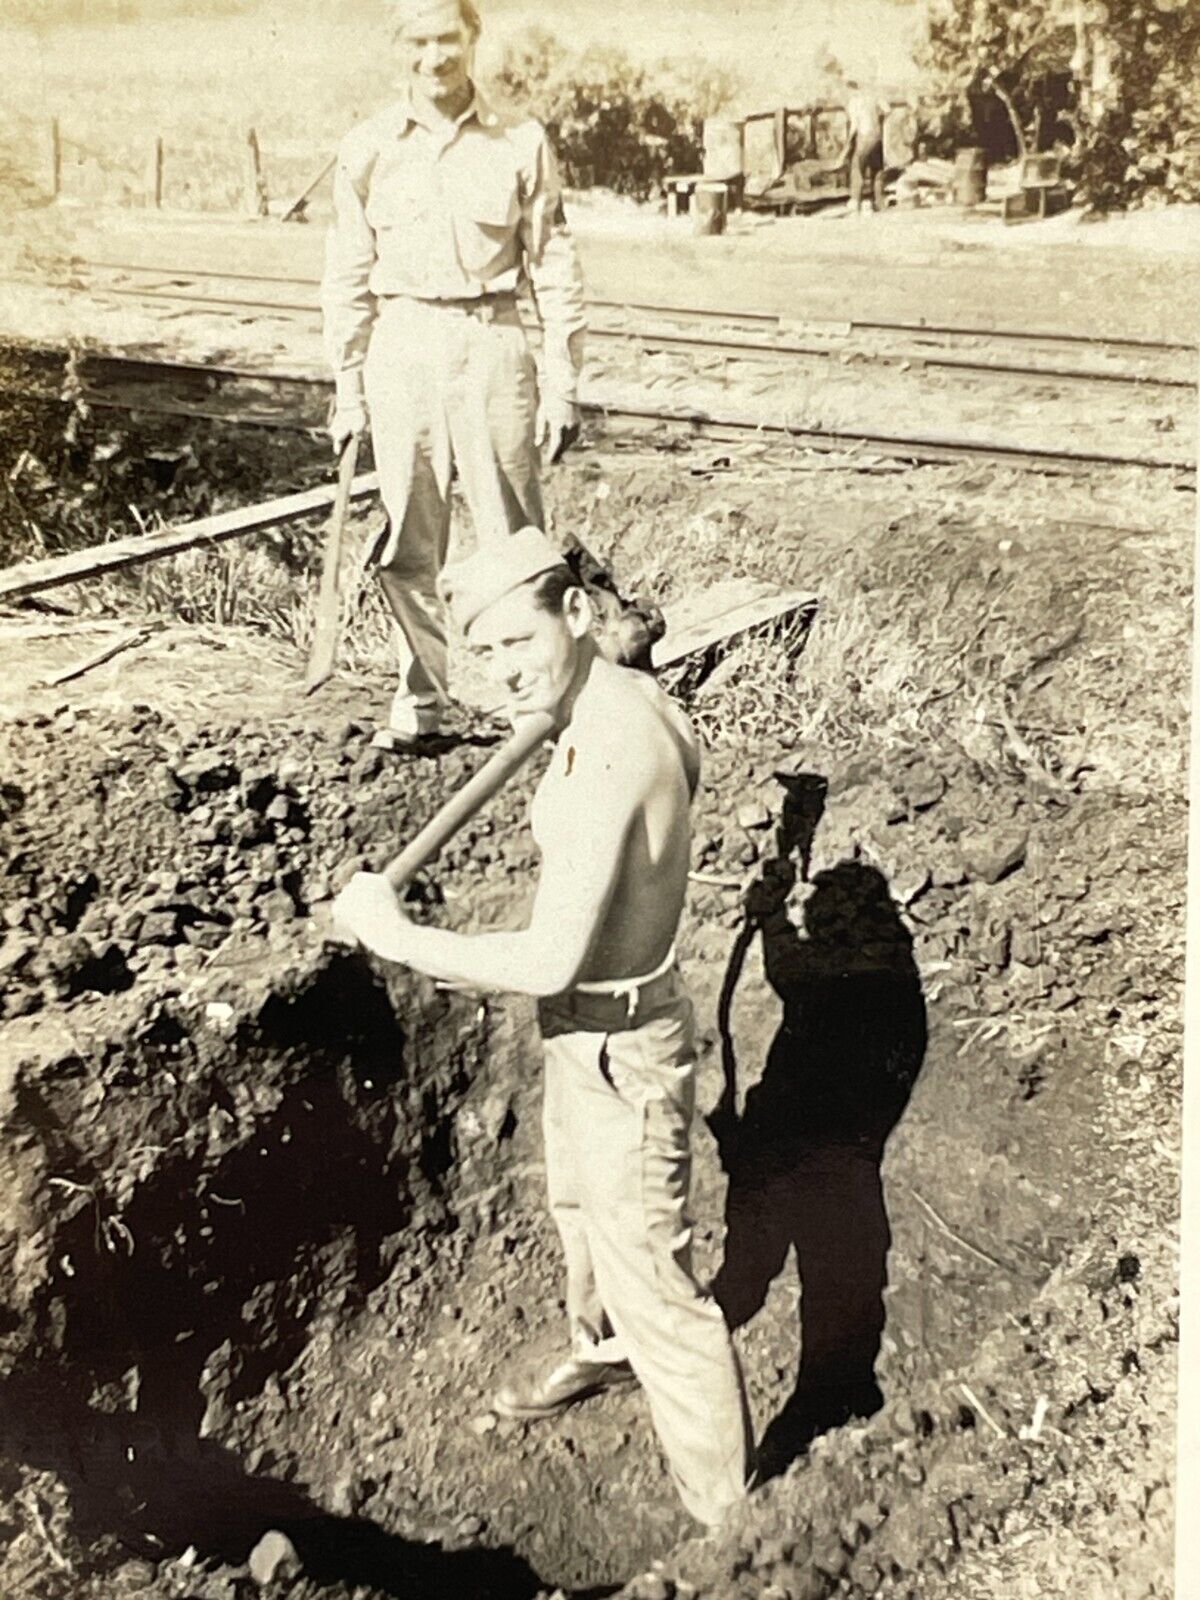 WC Photograph Handsome Man Shovel Digging Hole Shirtless Sexy 1940s Worker Labor